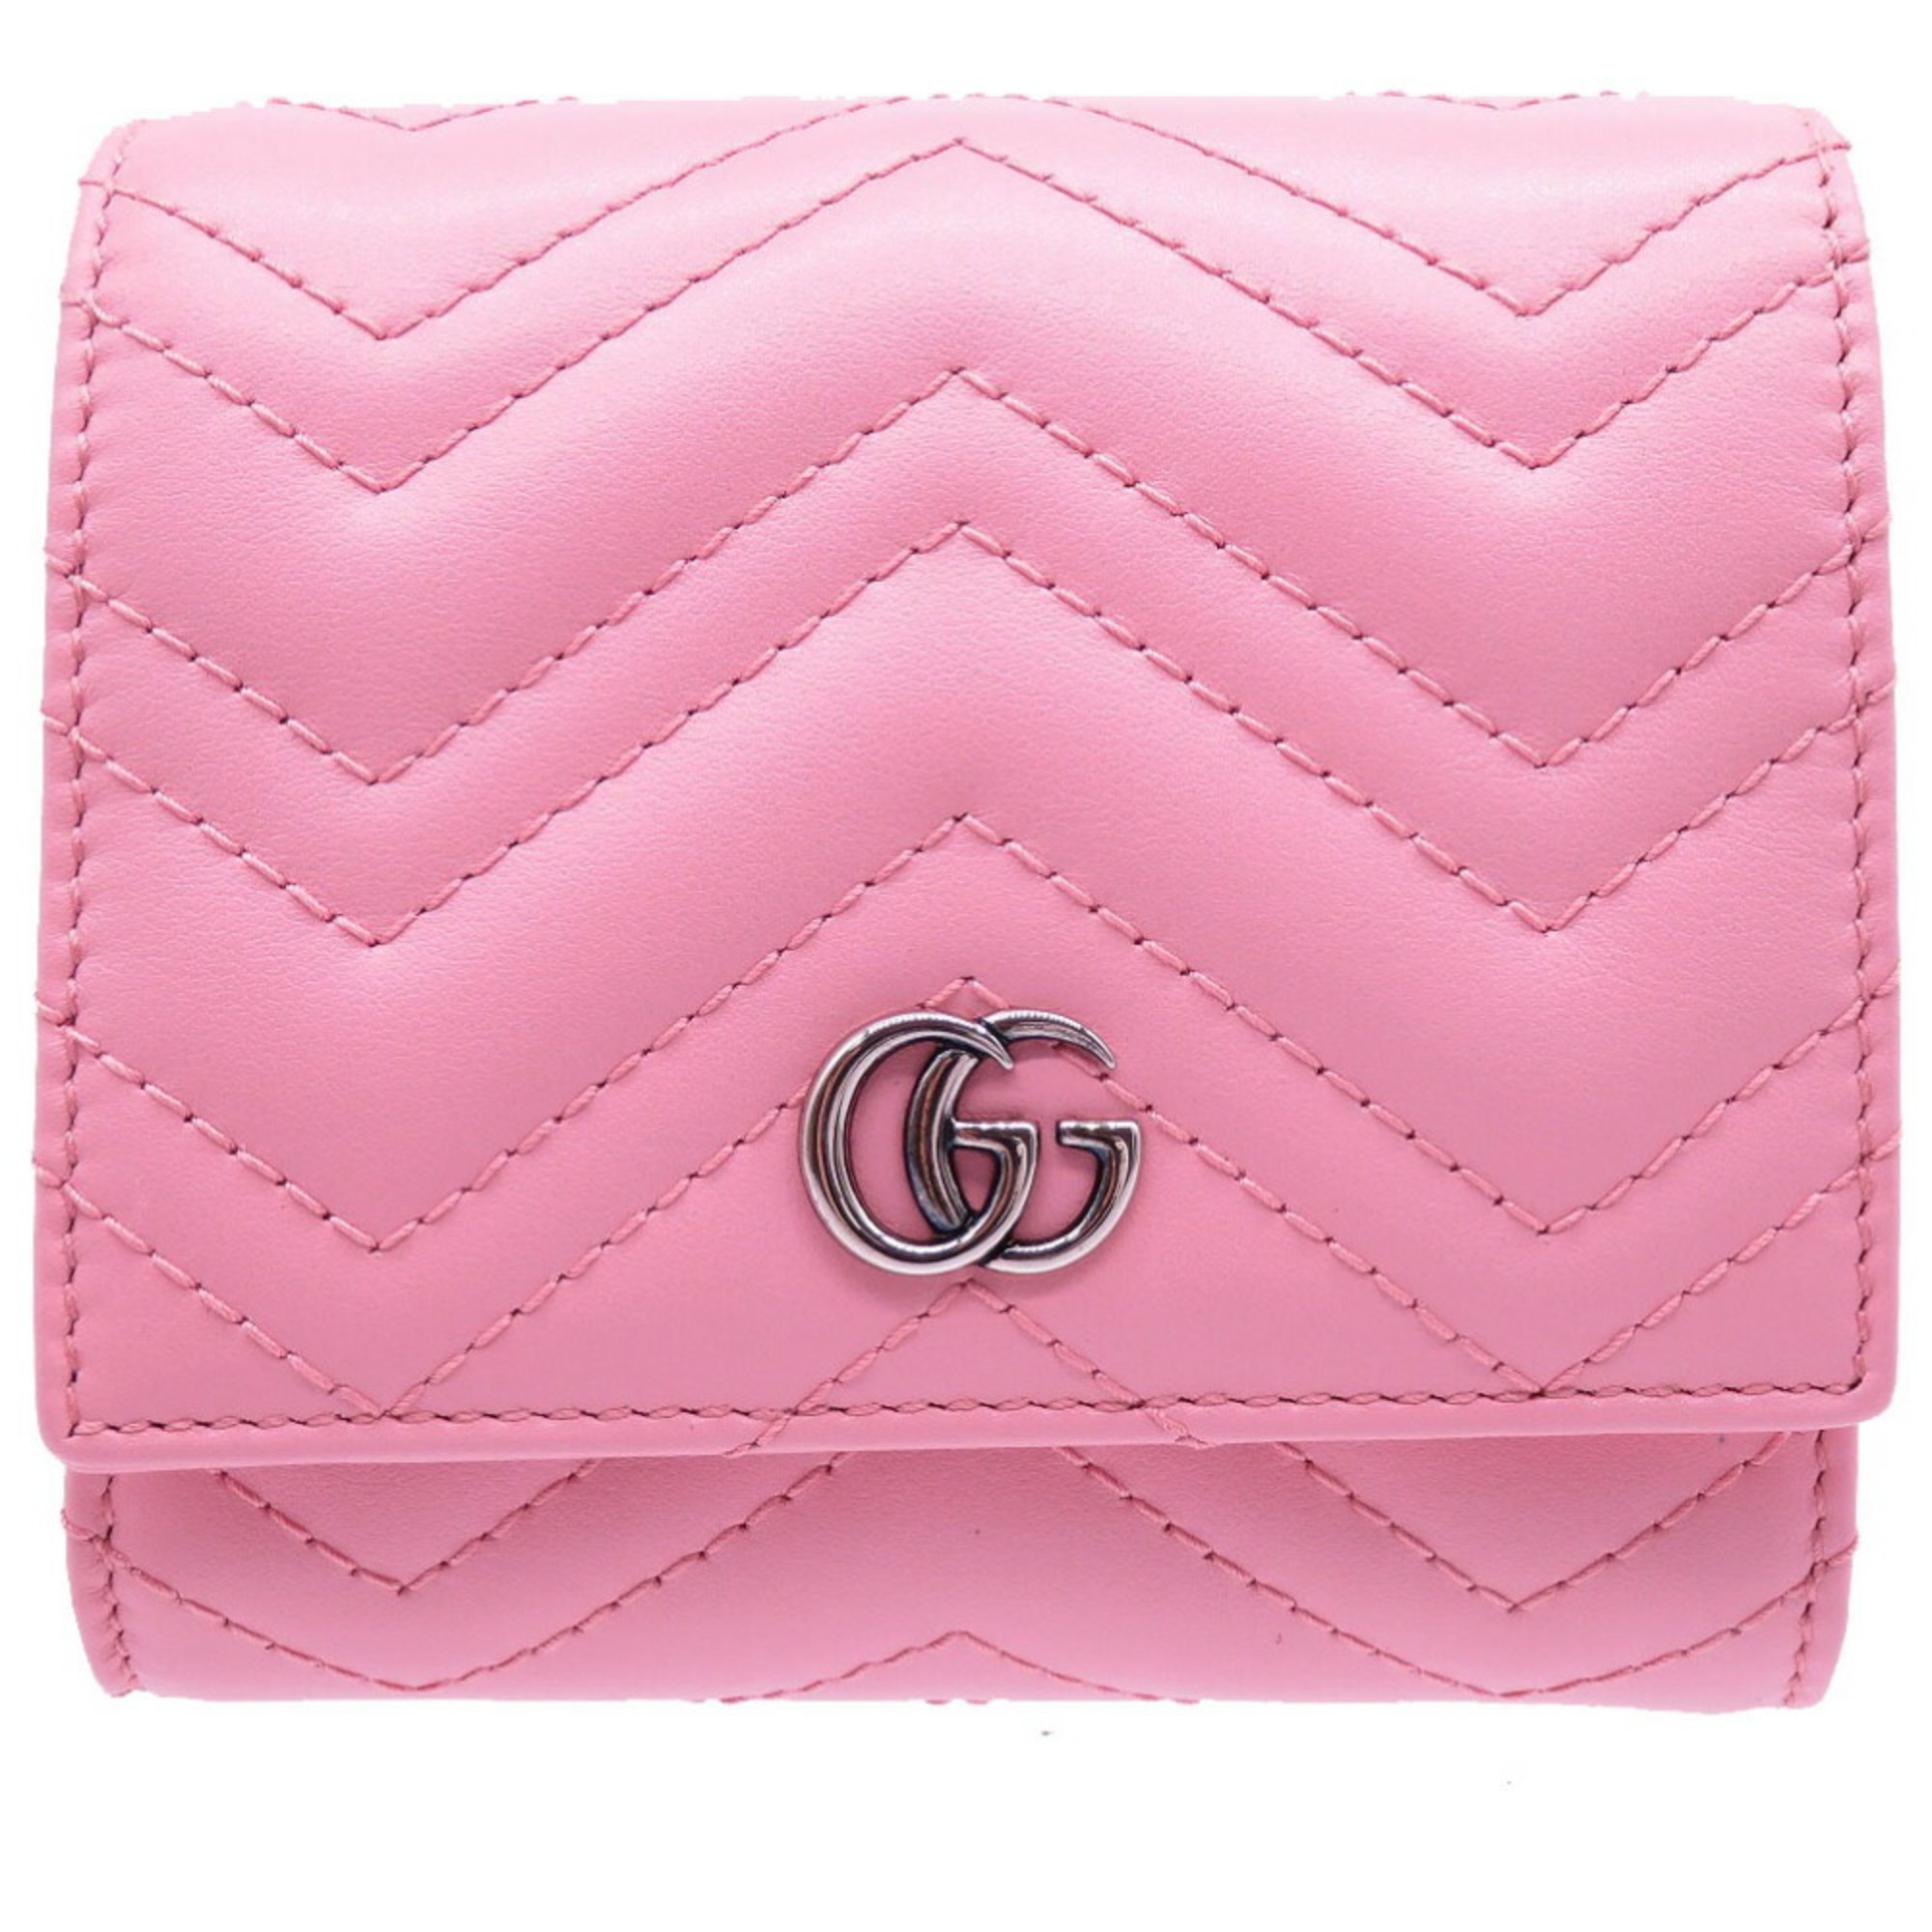 Gucci GG Marmont 598629 Compact Wallet Leather Pink Bifold 0052GUCCI 6B0052AEA5